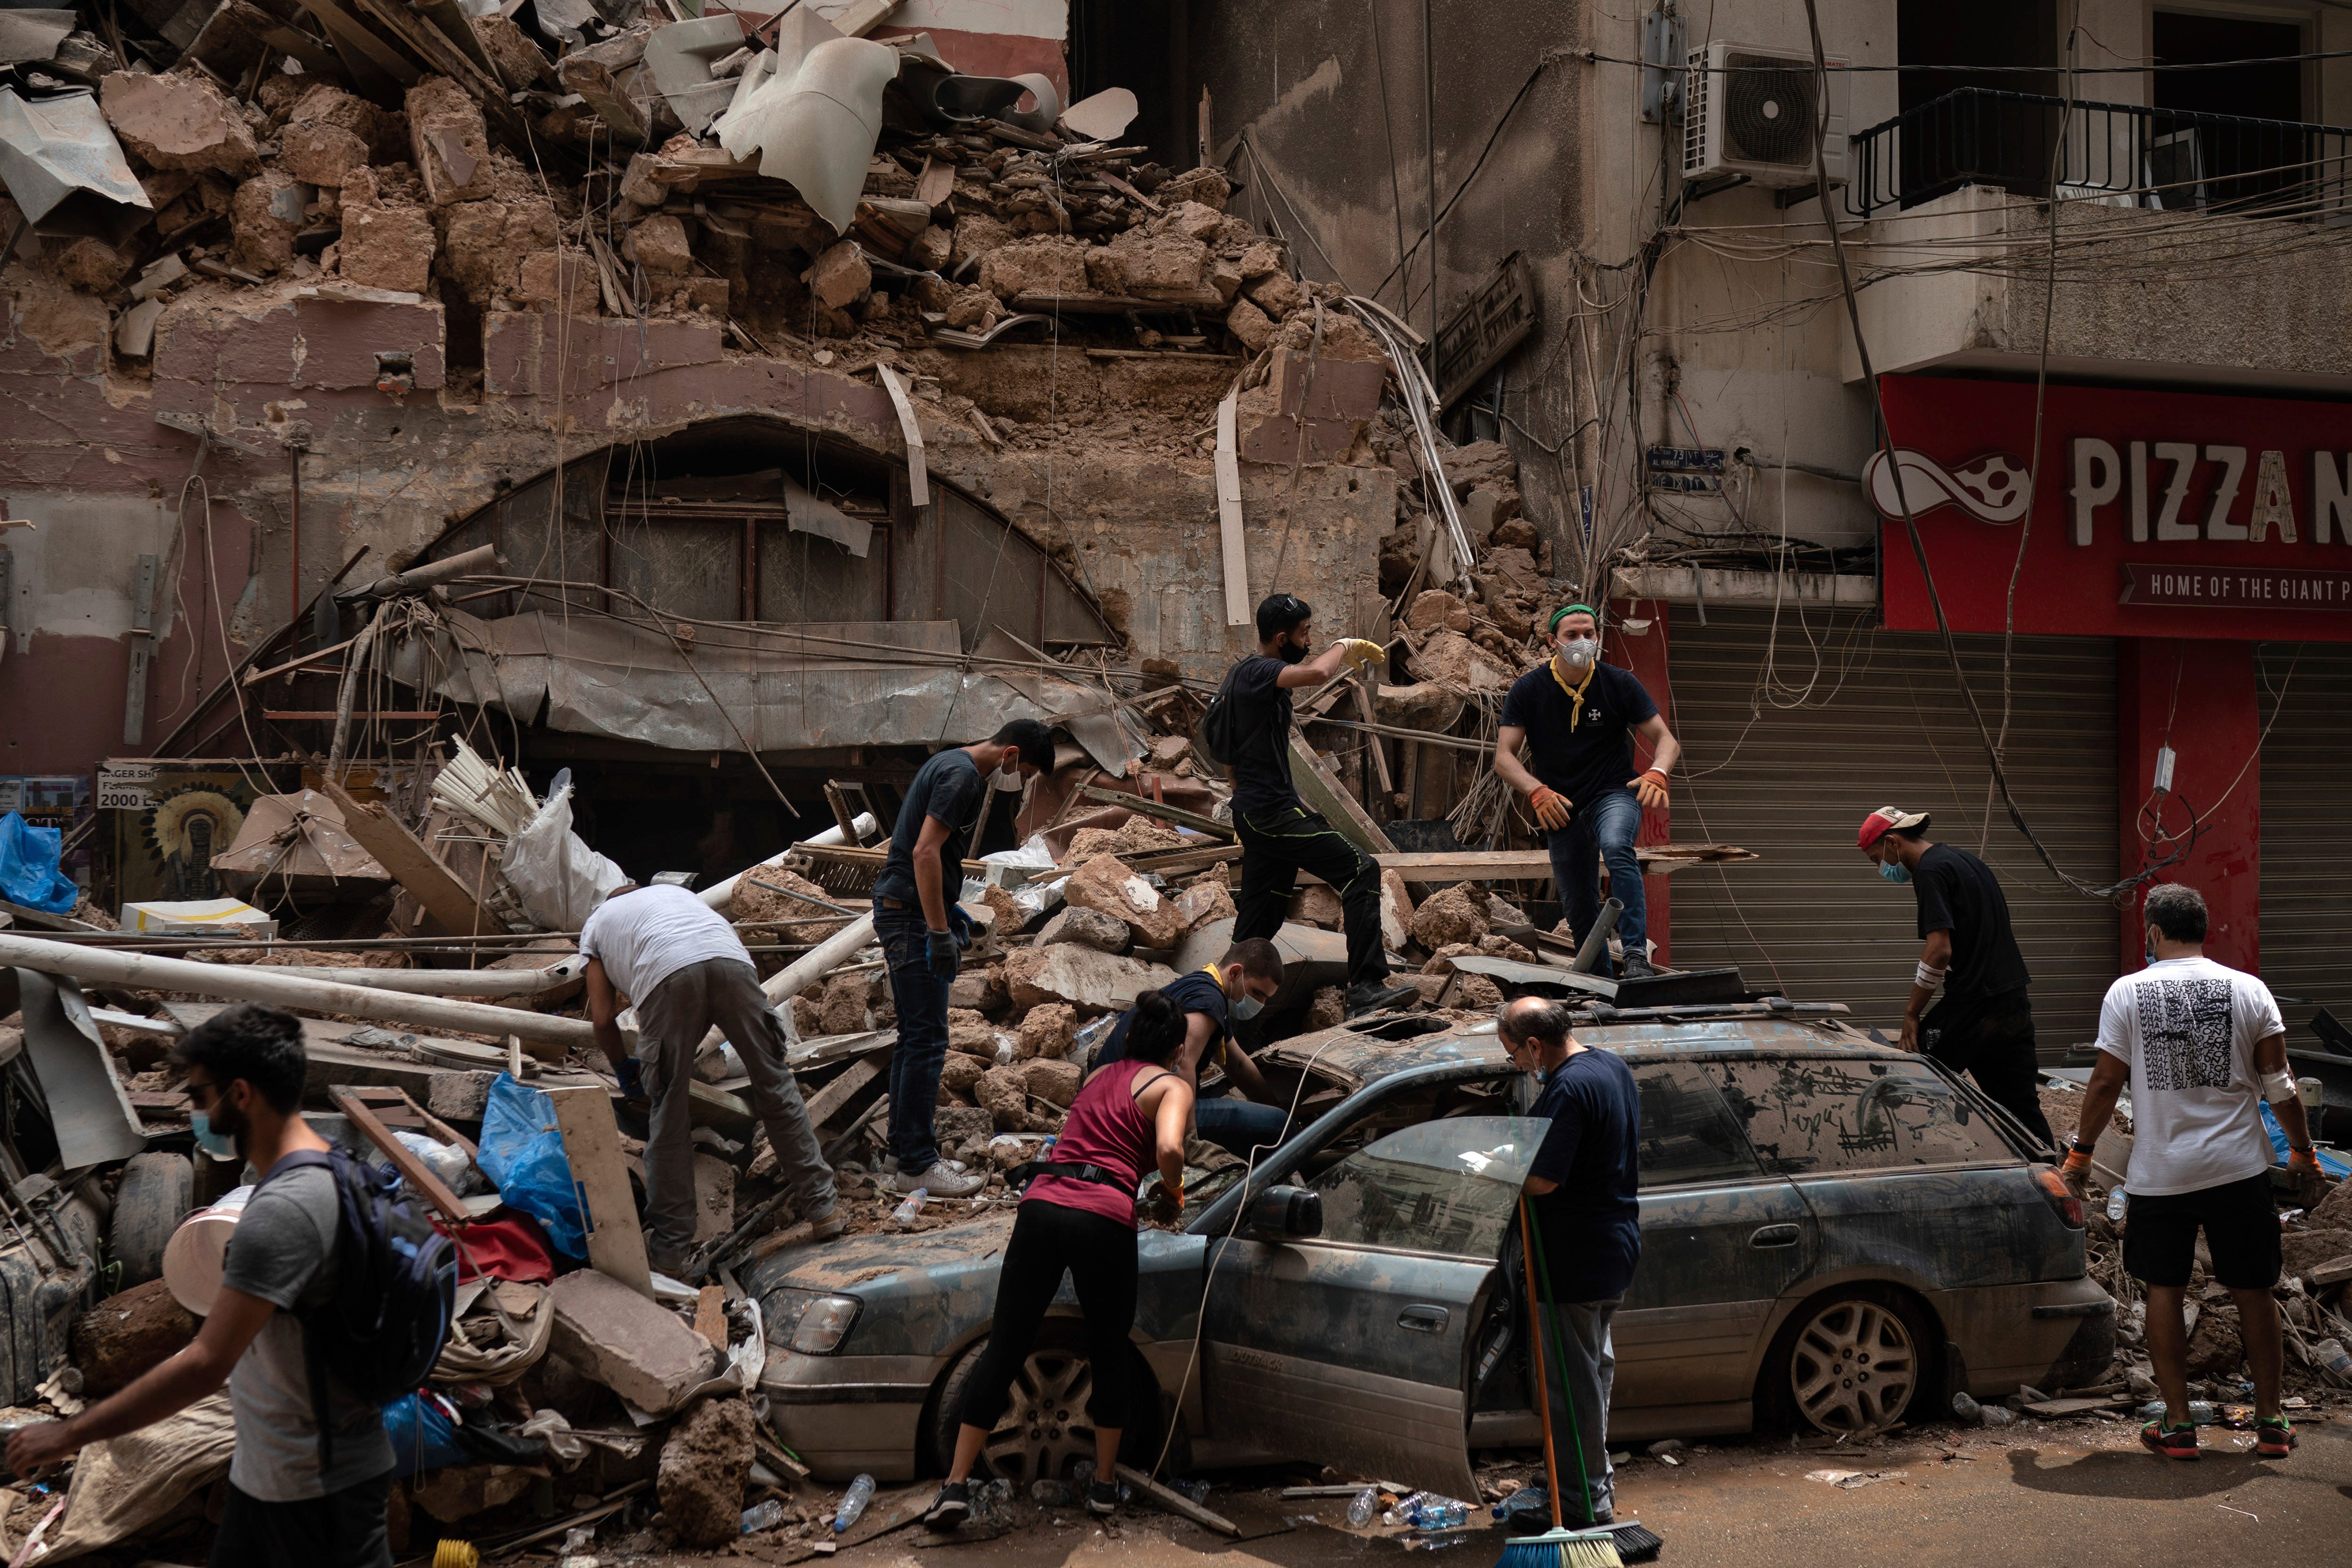 People remove debris from a house damaged by Tuesday's explosion in the seaport of Beirut, Lebanon, Friday, Aug. 7, 2020.  Rescue teams were still searching the rubble of Beirut's port for bodies on Friday, nearly three days after the massive explosion sent a wave of destruction through Lebanon's capital.